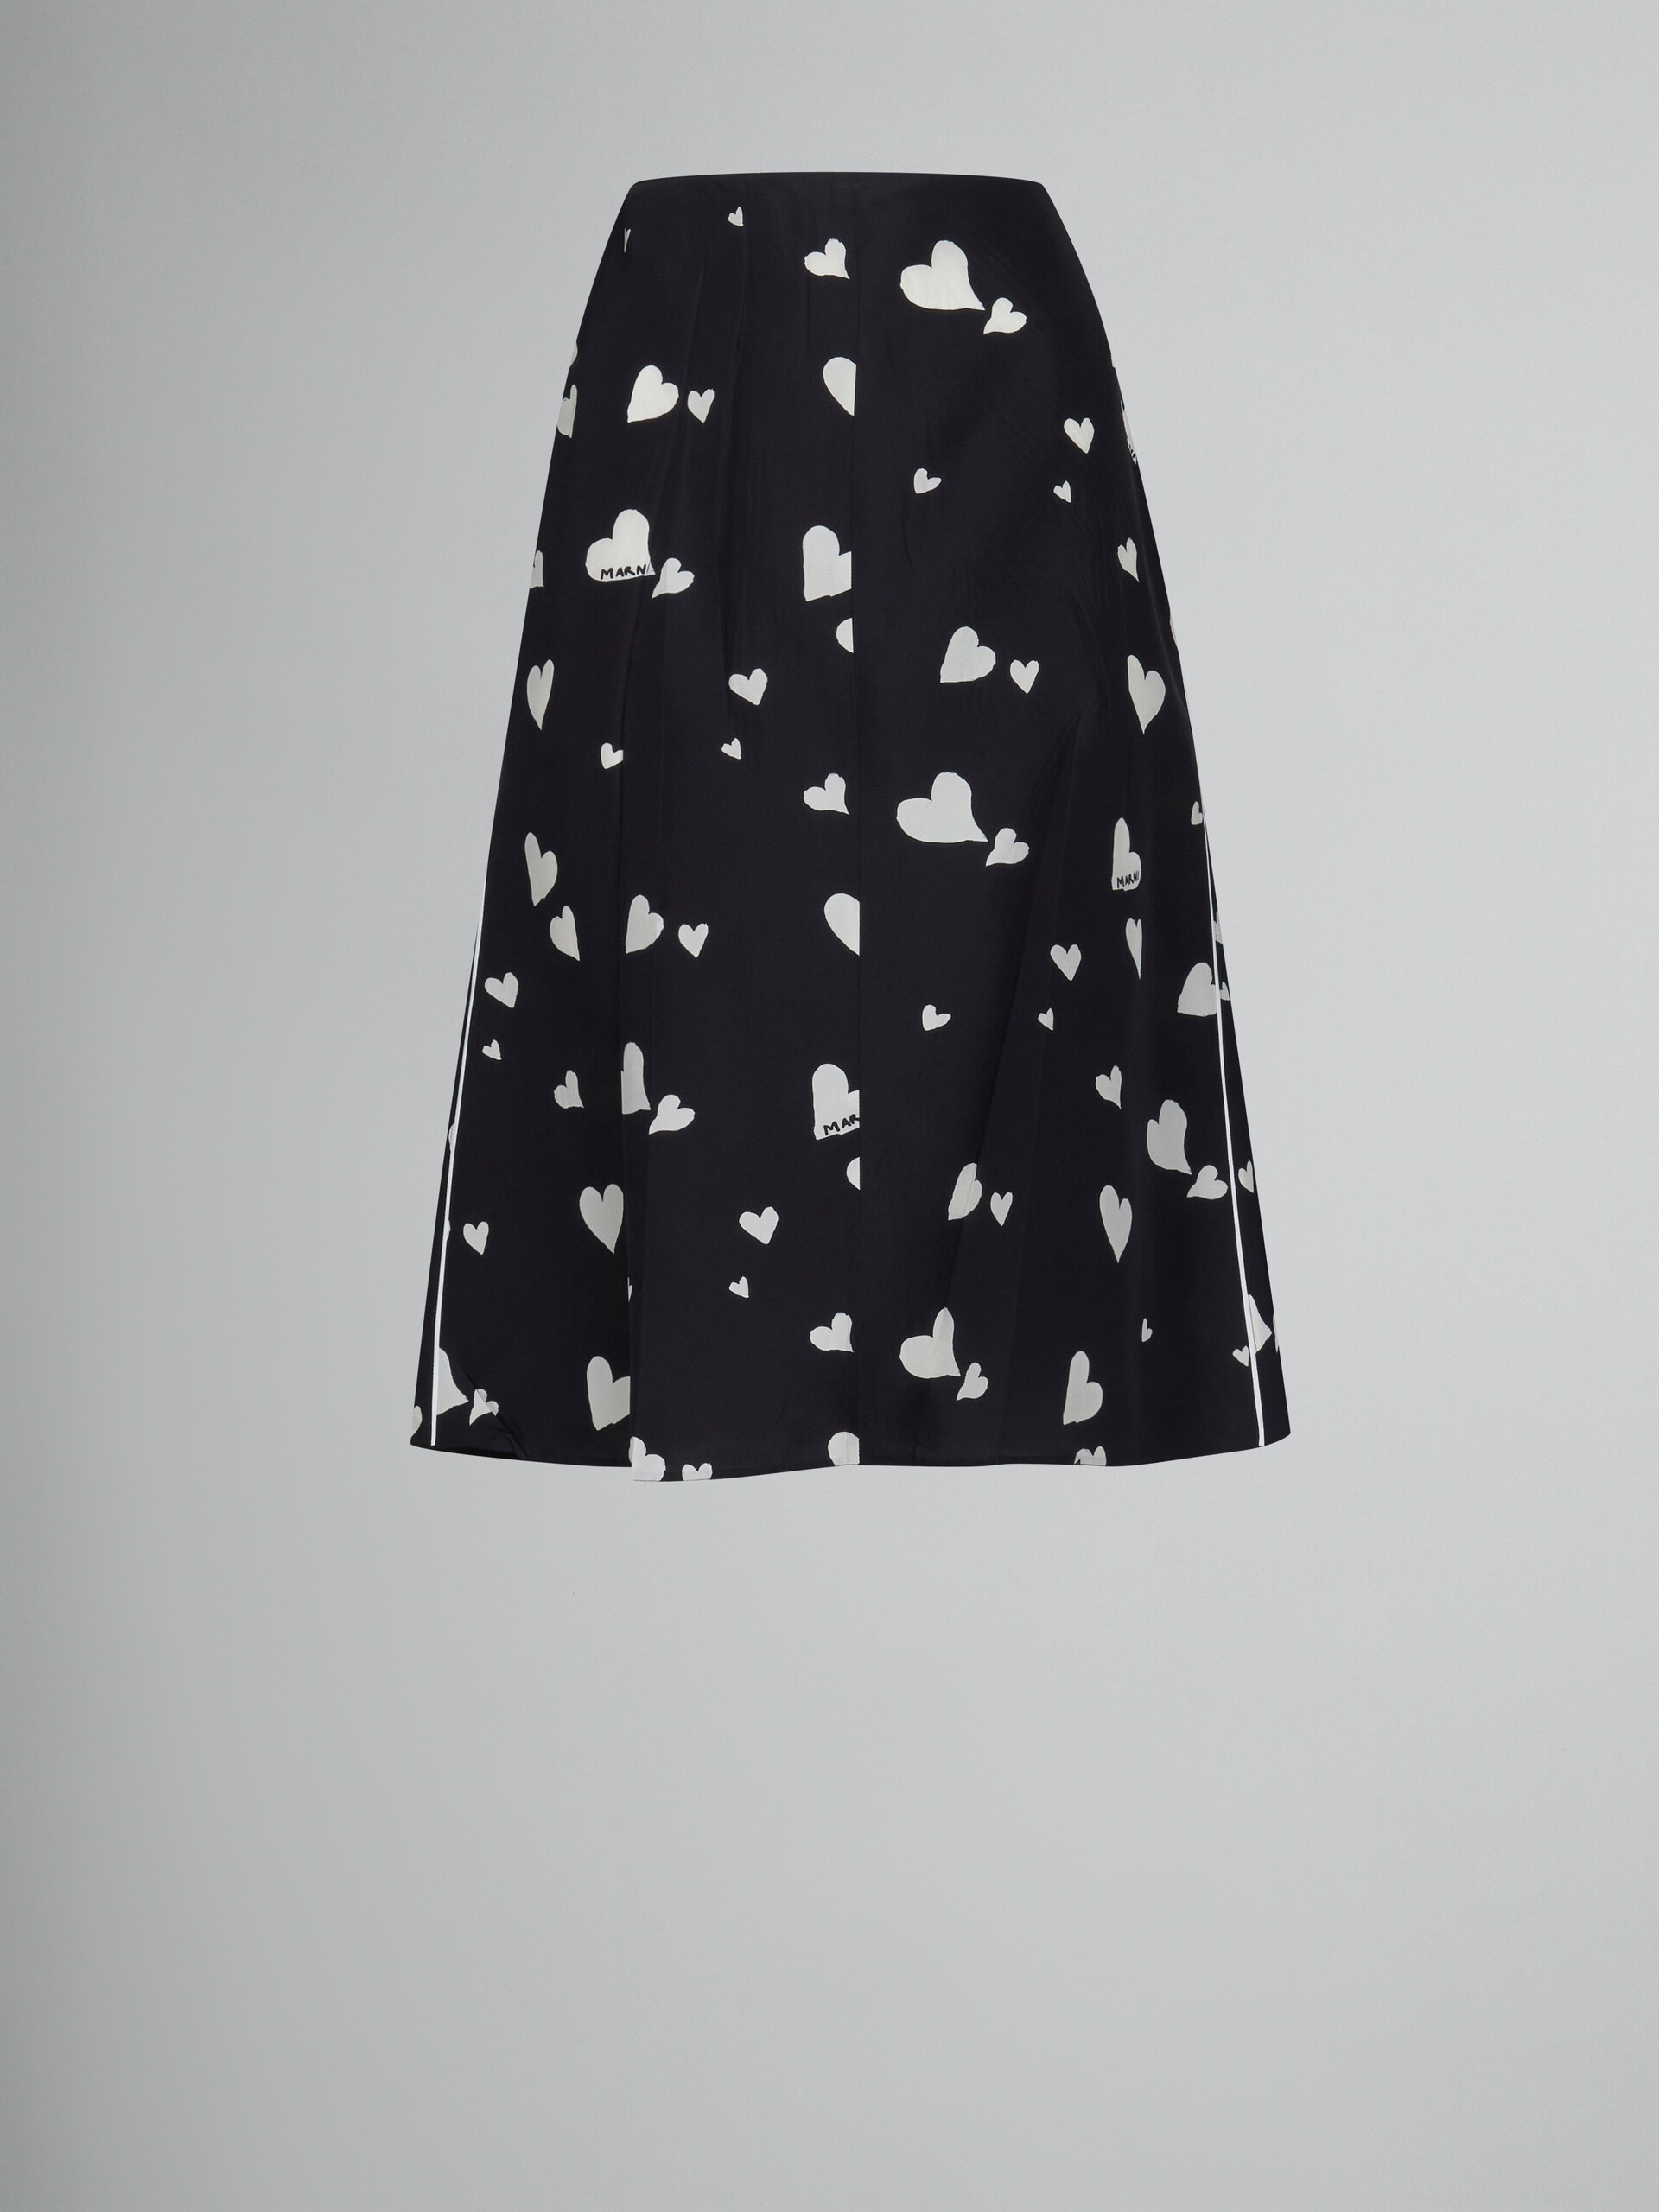 BLACK FLARED SILK SKIRT WITH BUNCH OF HEARTS PRINT - 1